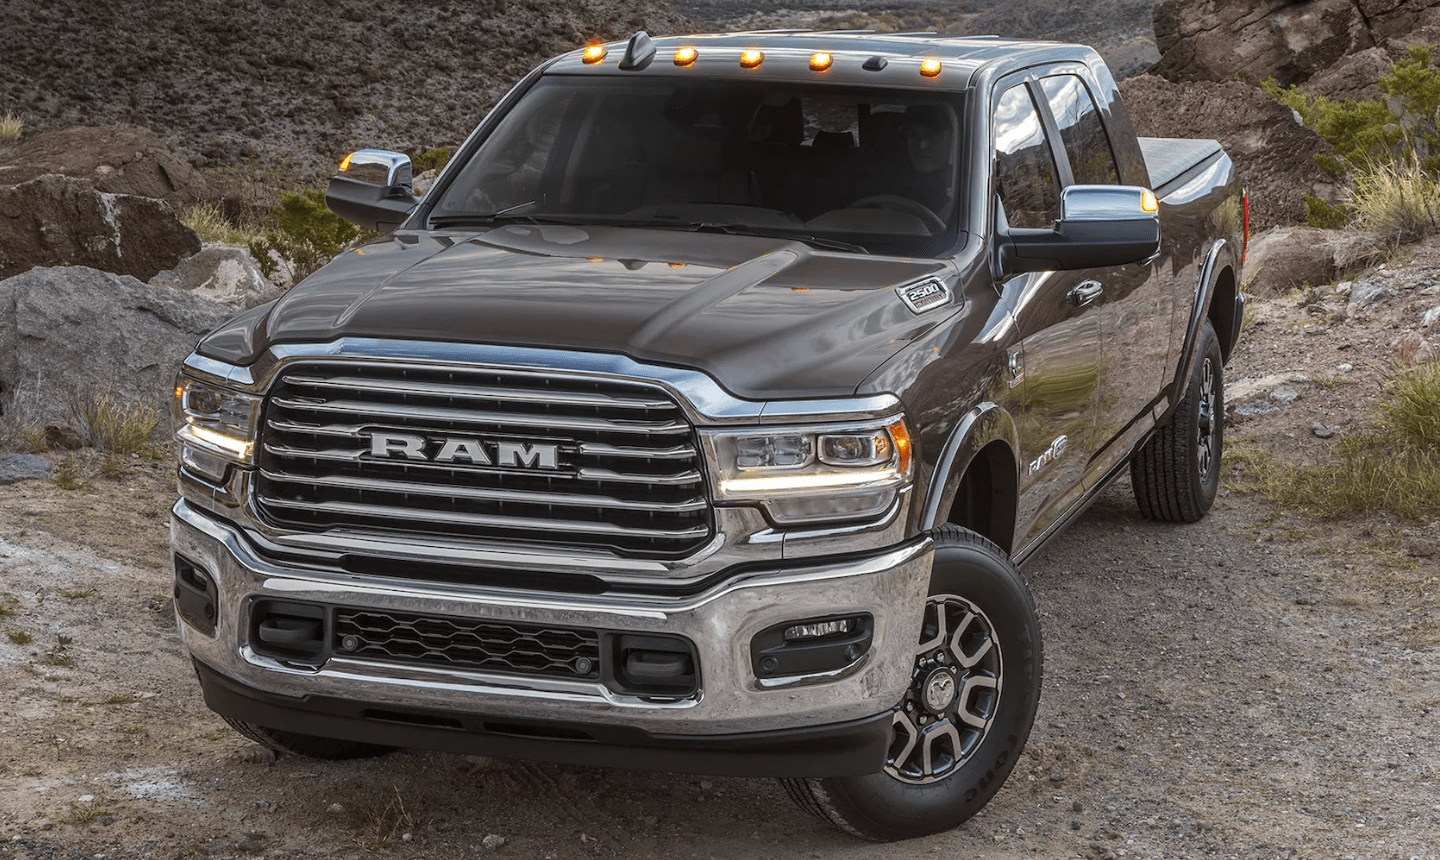 2024 Ram 2500 Release Date & Price The Cars Magz